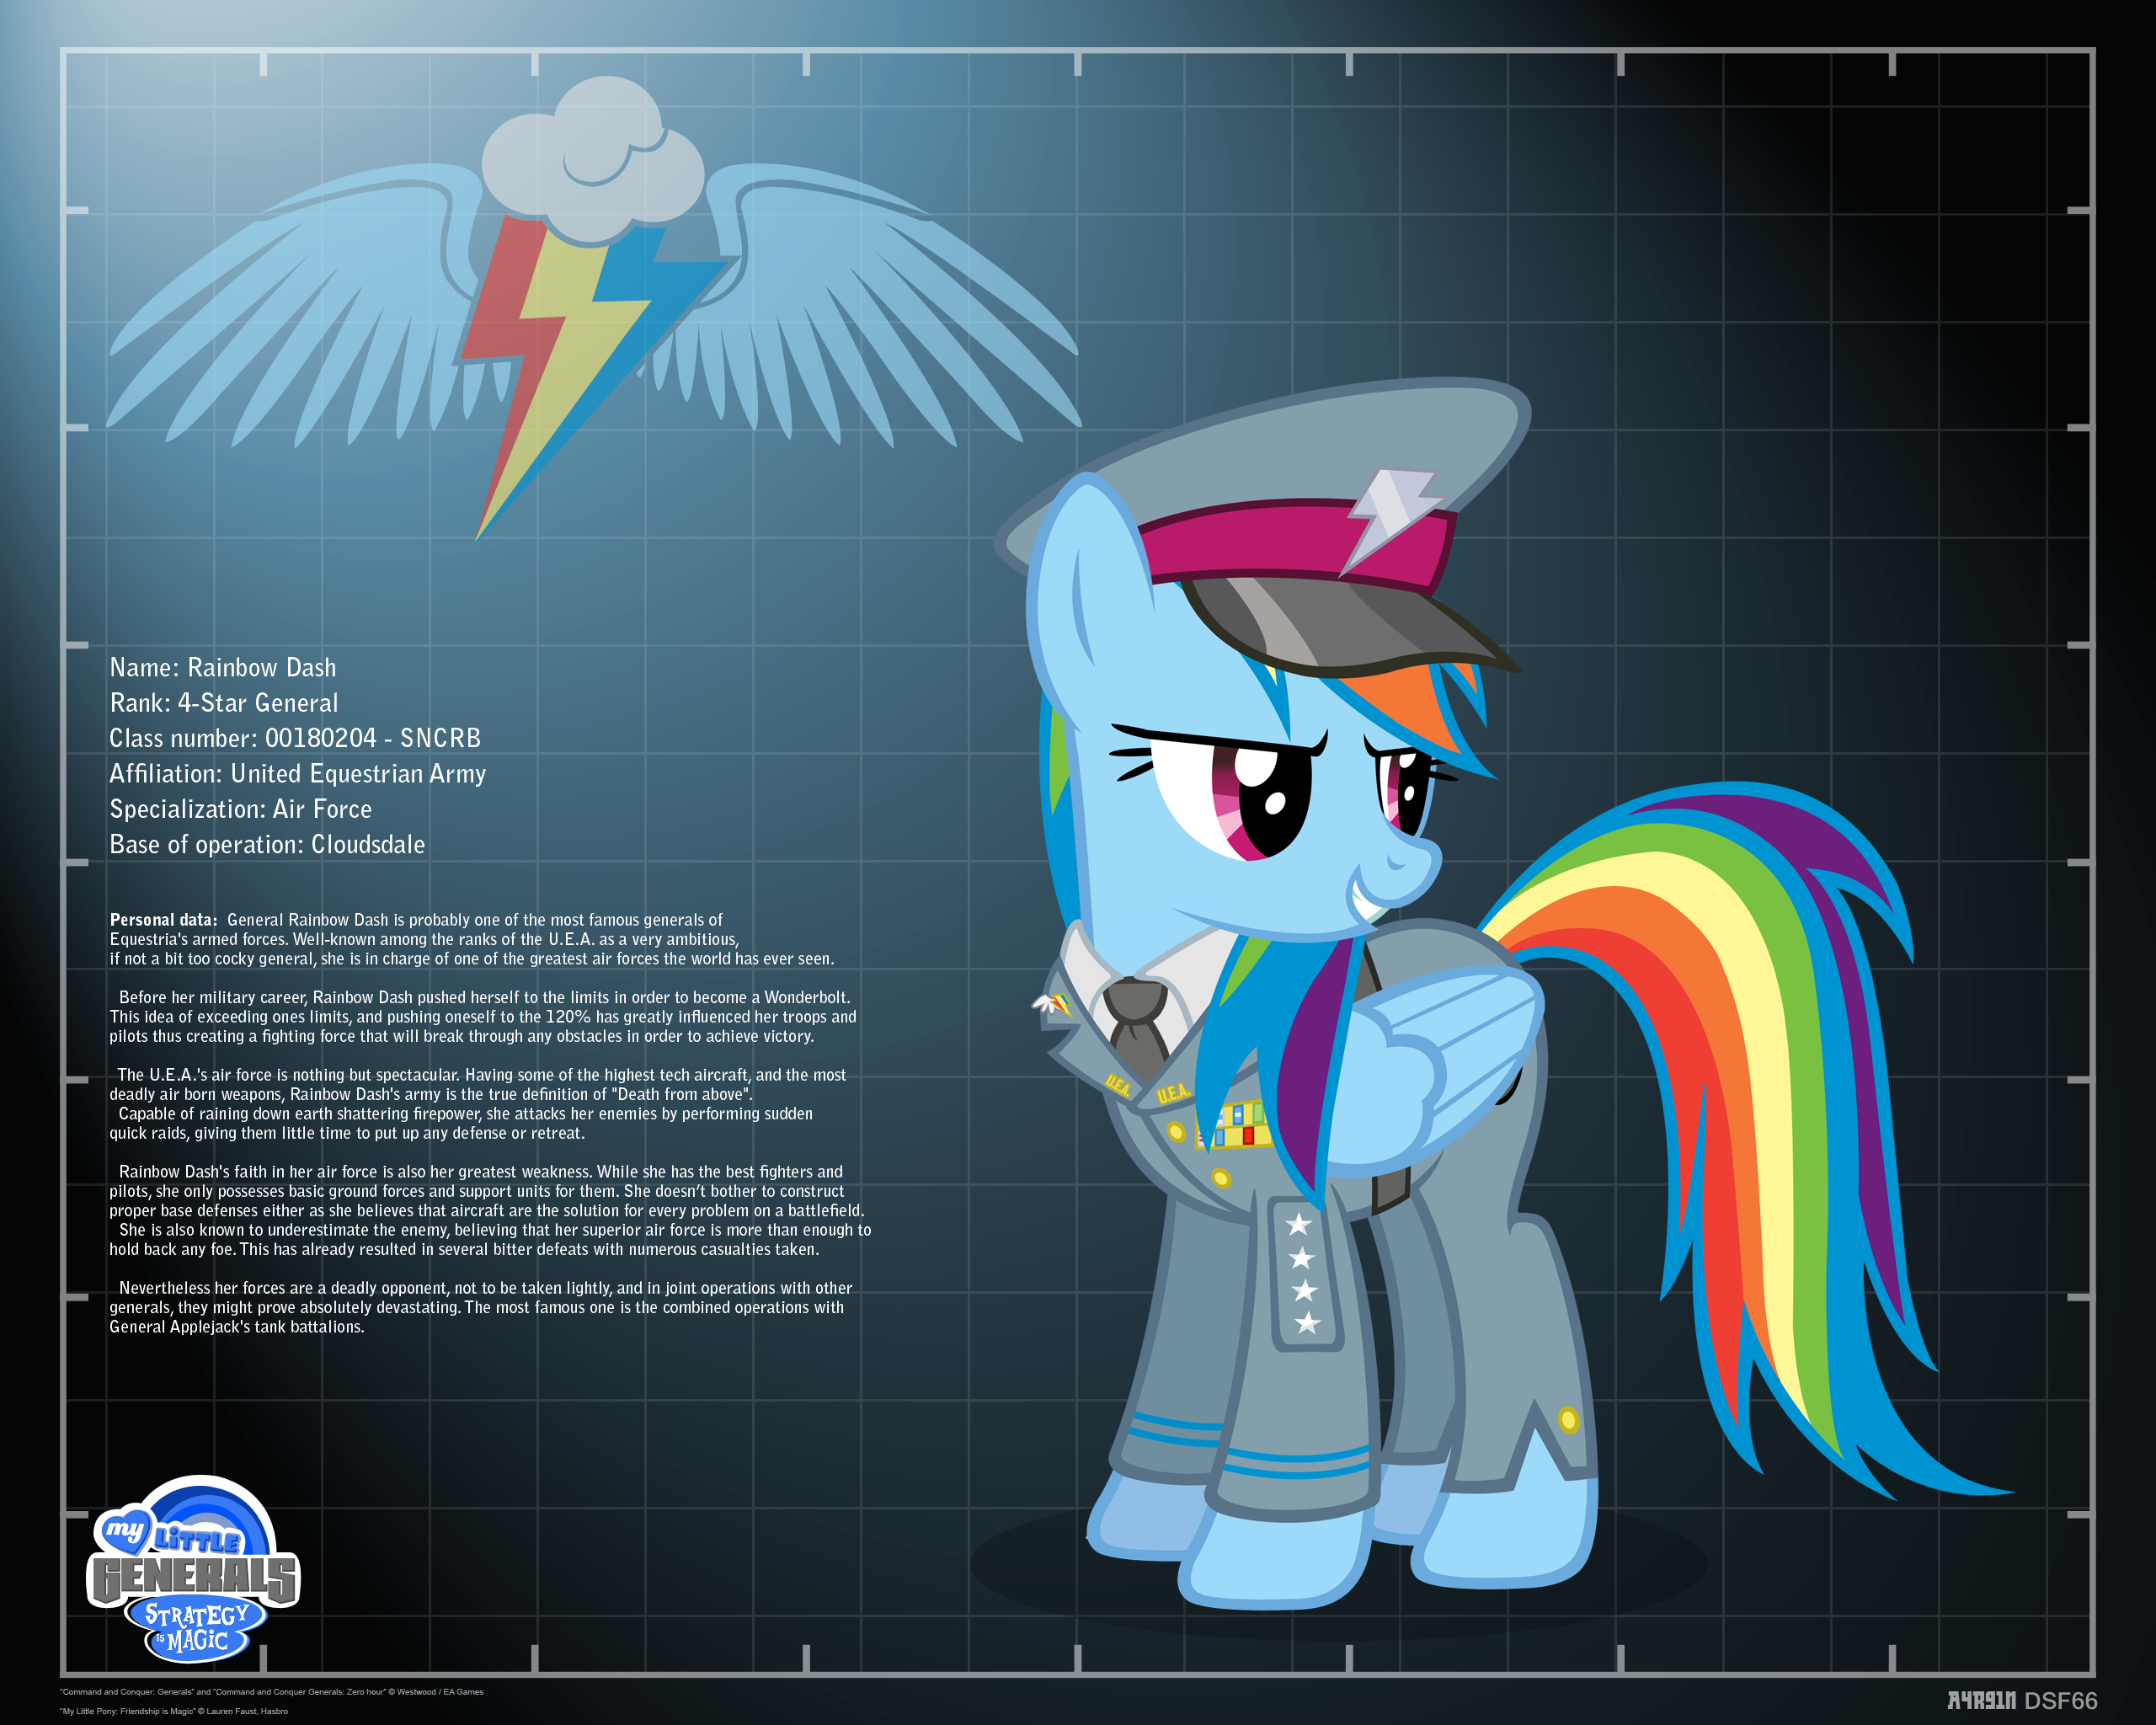 general_rainbow_dash___profile_info_by_a